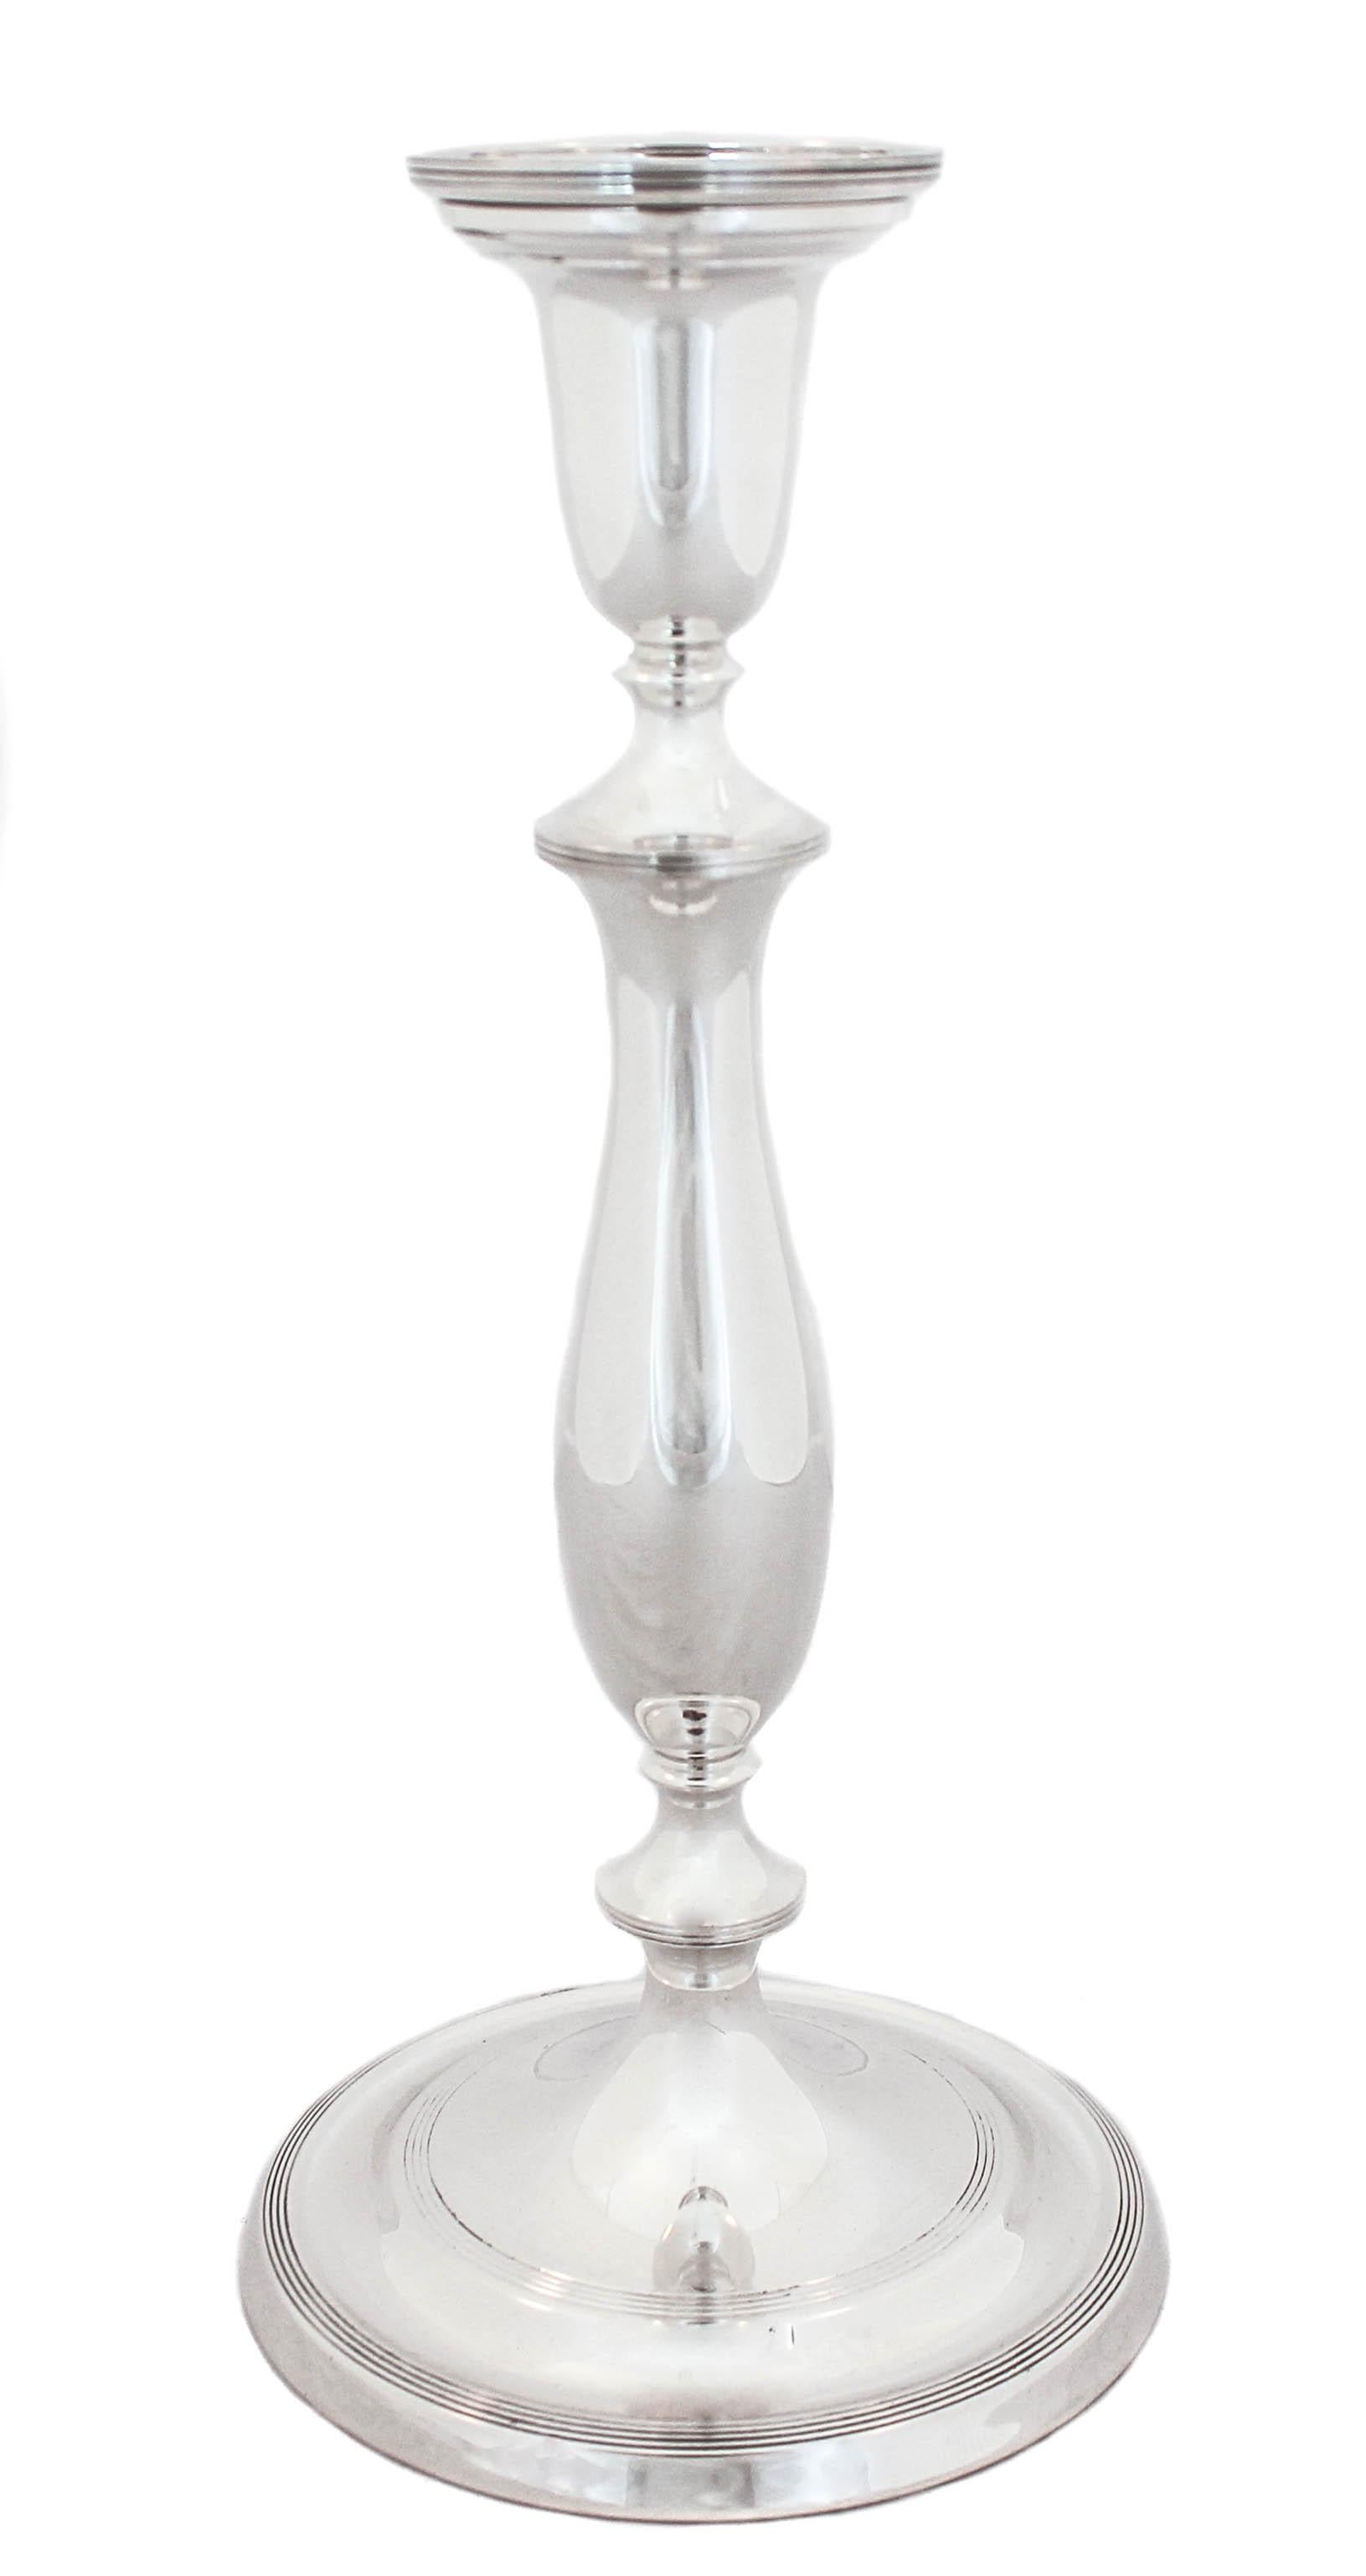 Being offered is a lovely pair of sterling silver candlesticks by Towle Silversmiths in the “Marie Louise” pattern of 1939.  A classic, timeless design gives these understated candleholders a distinguished and sophisticated air.  They are as